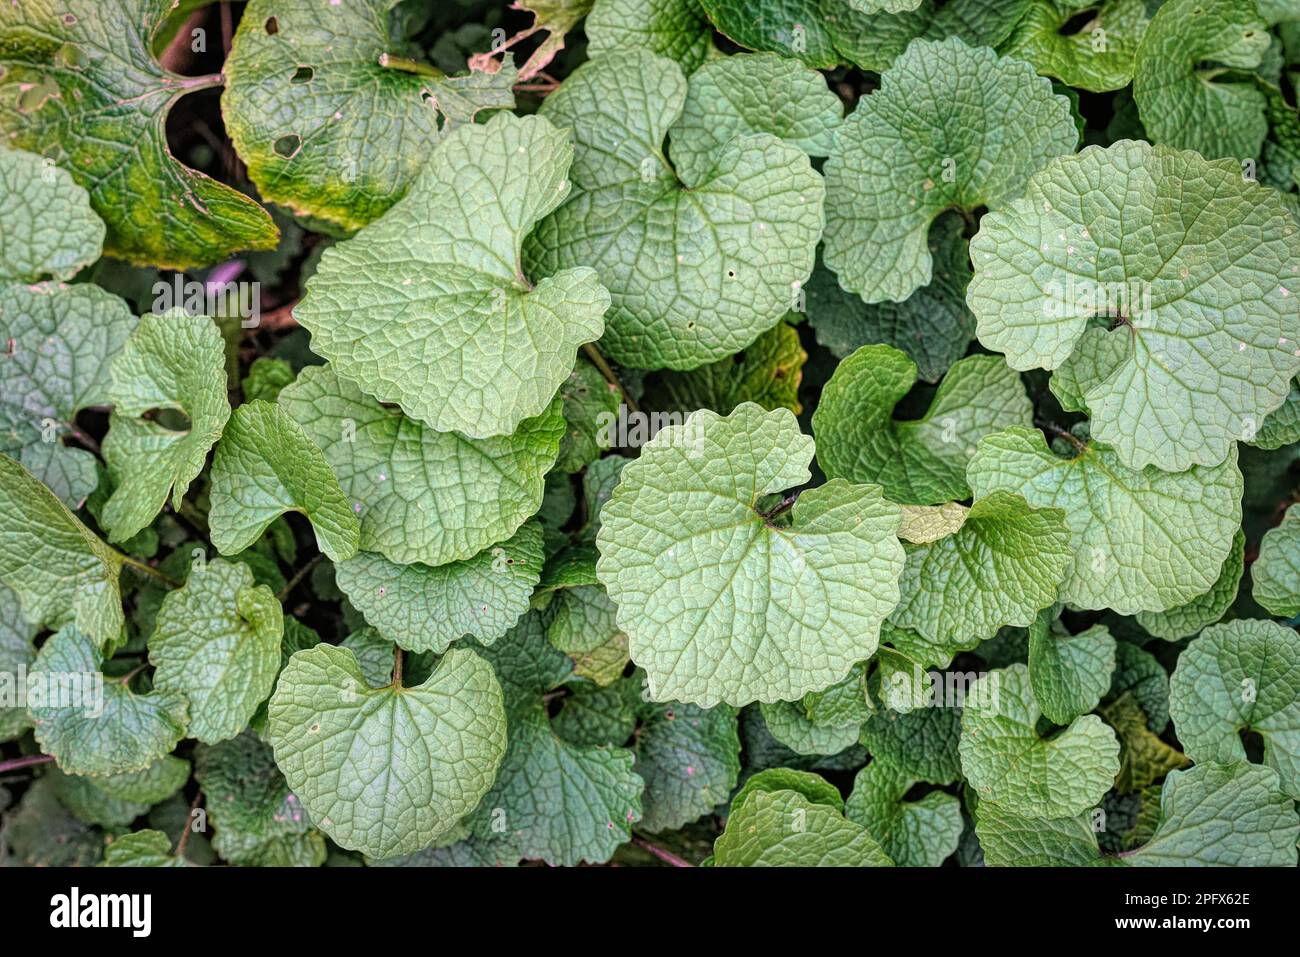 Natural close up on the green leaves of a fresh emerging Garlic mustard wildflower plant, Alliaria petiolata Stock Photo